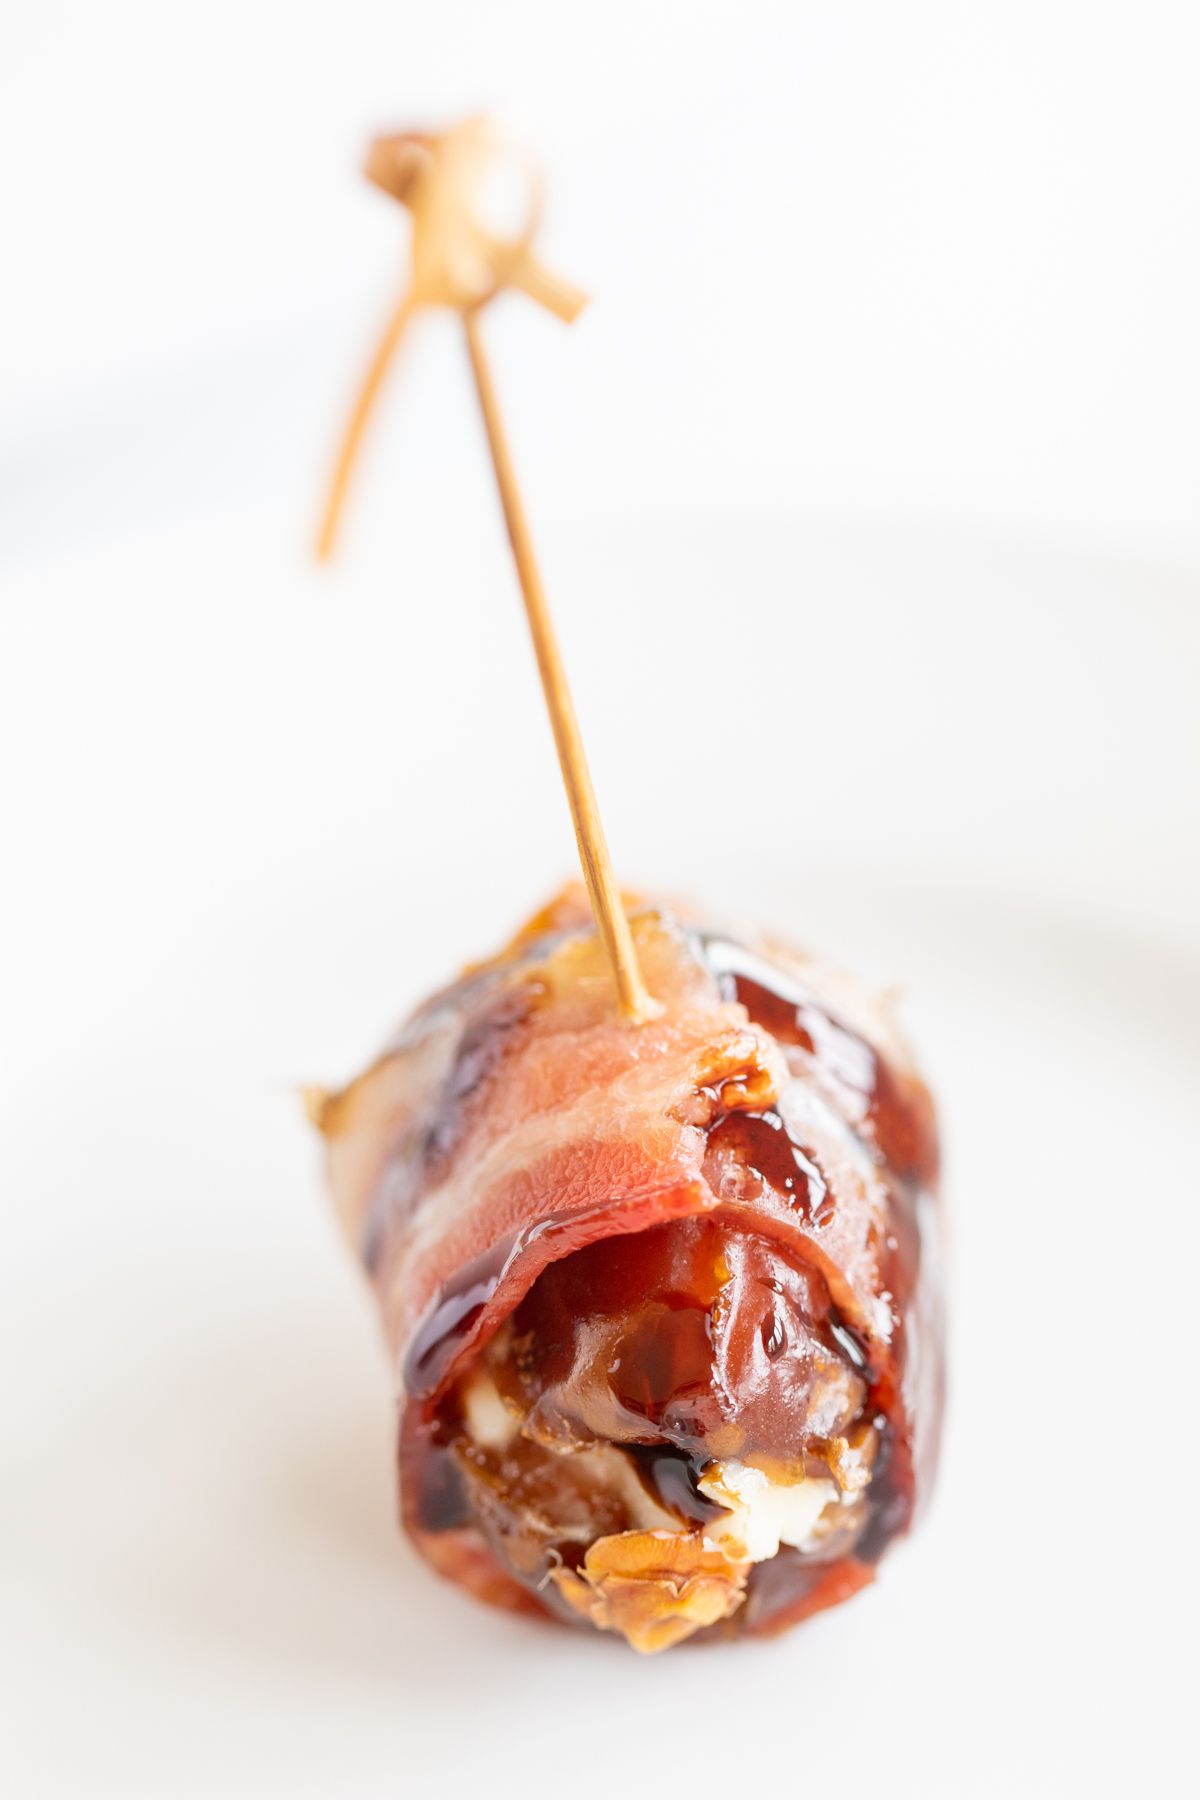 A close up of stuffed dates wrapped in bacon and drizzled in balsamic glaze.